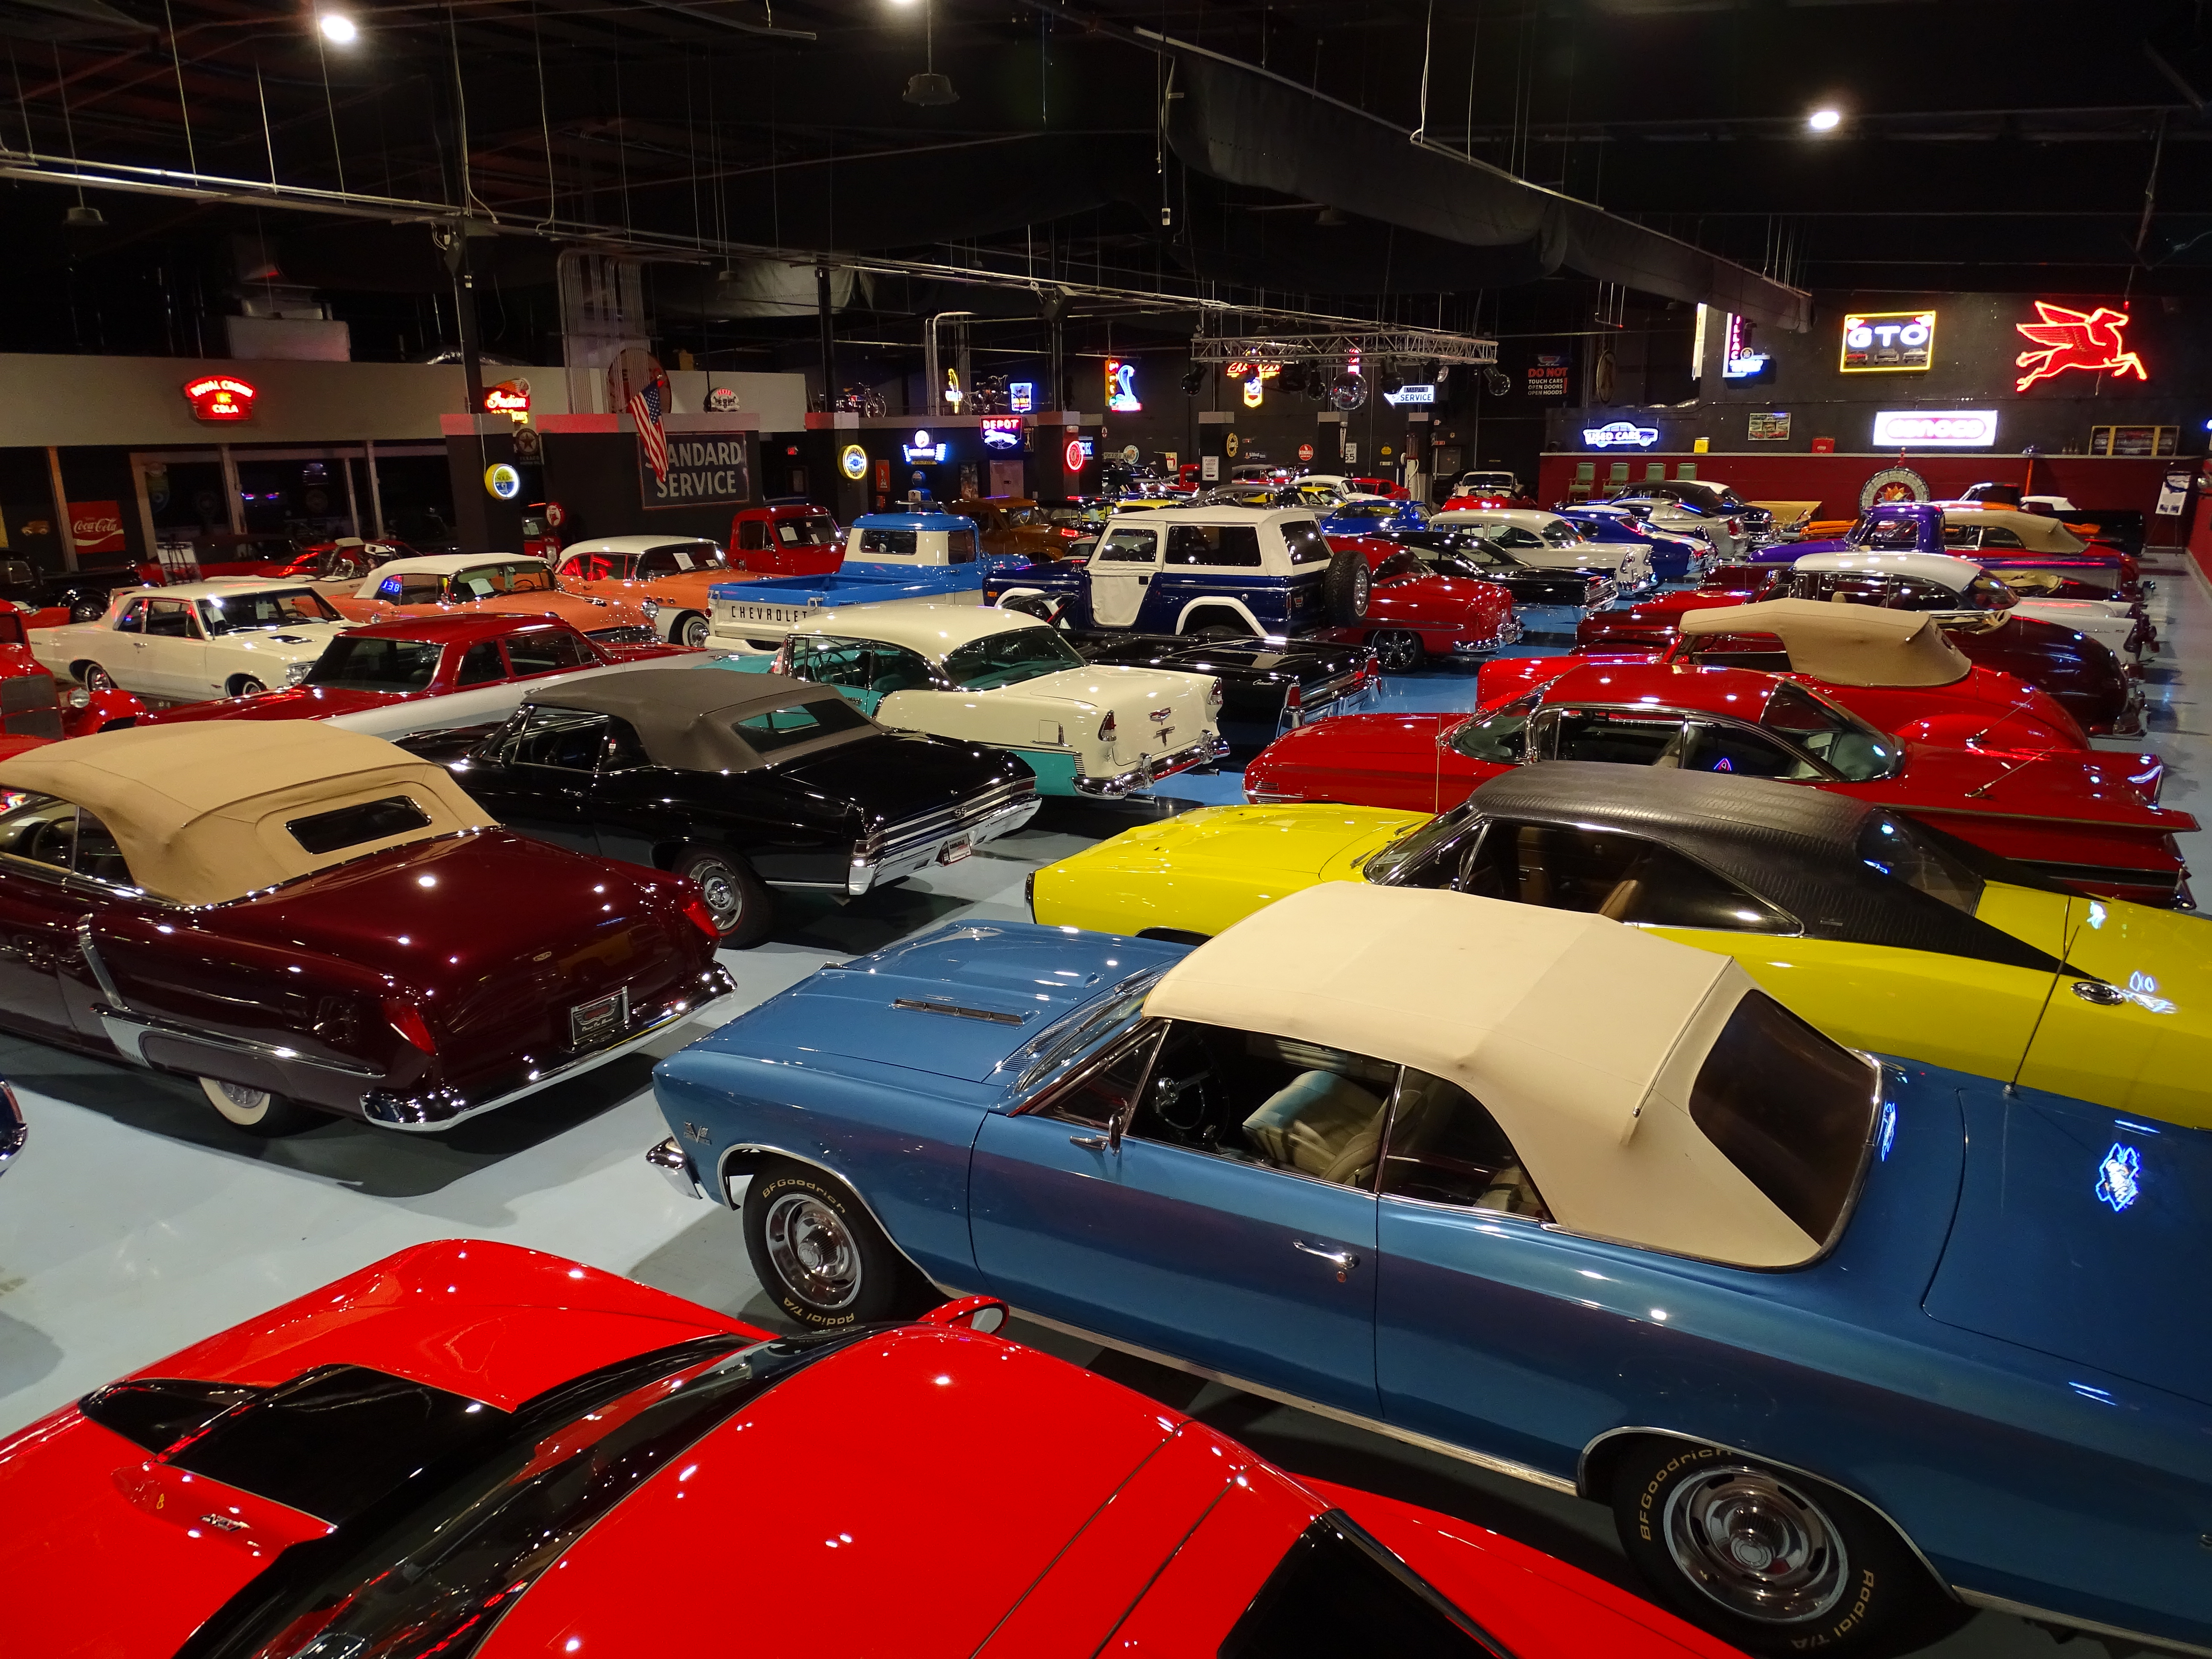 GAA Classic Cars to Hold a No Reserve Auction with 400 Classic Cars Plus Memorabilia This Month